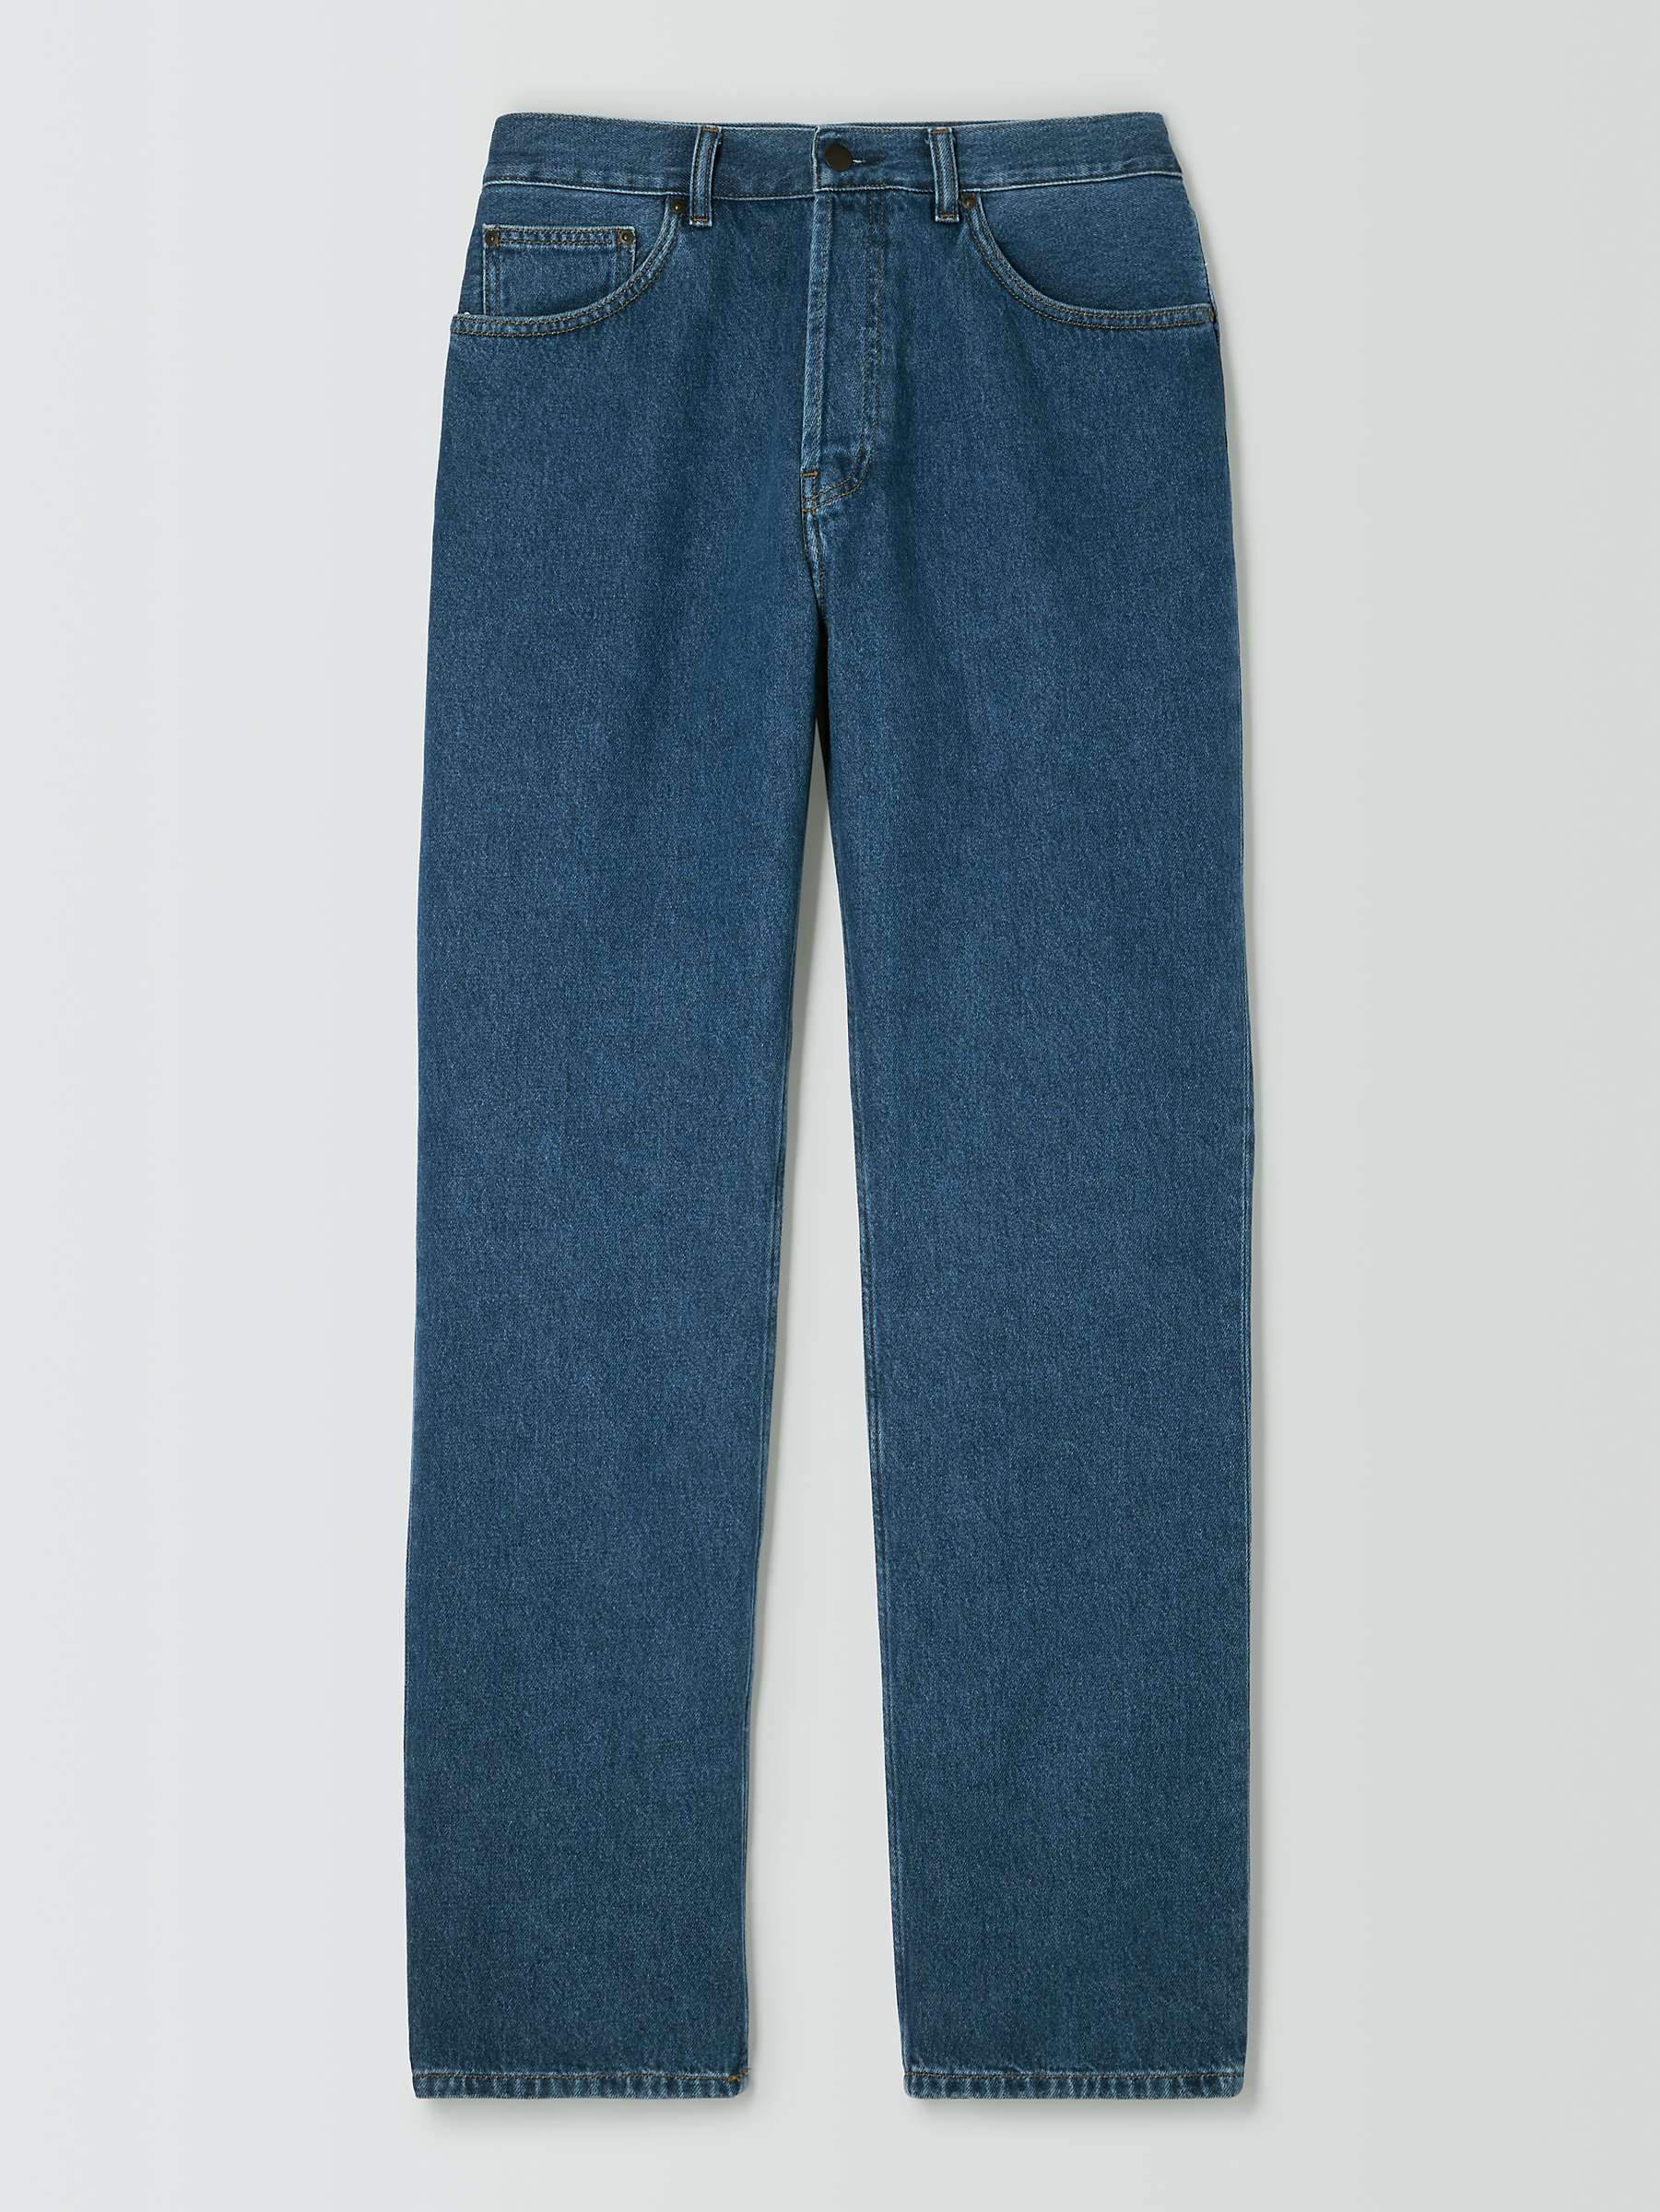 Buy Carhartt WIP Nolan Straight Fit Jeans, Blue Online at johnlewis.com